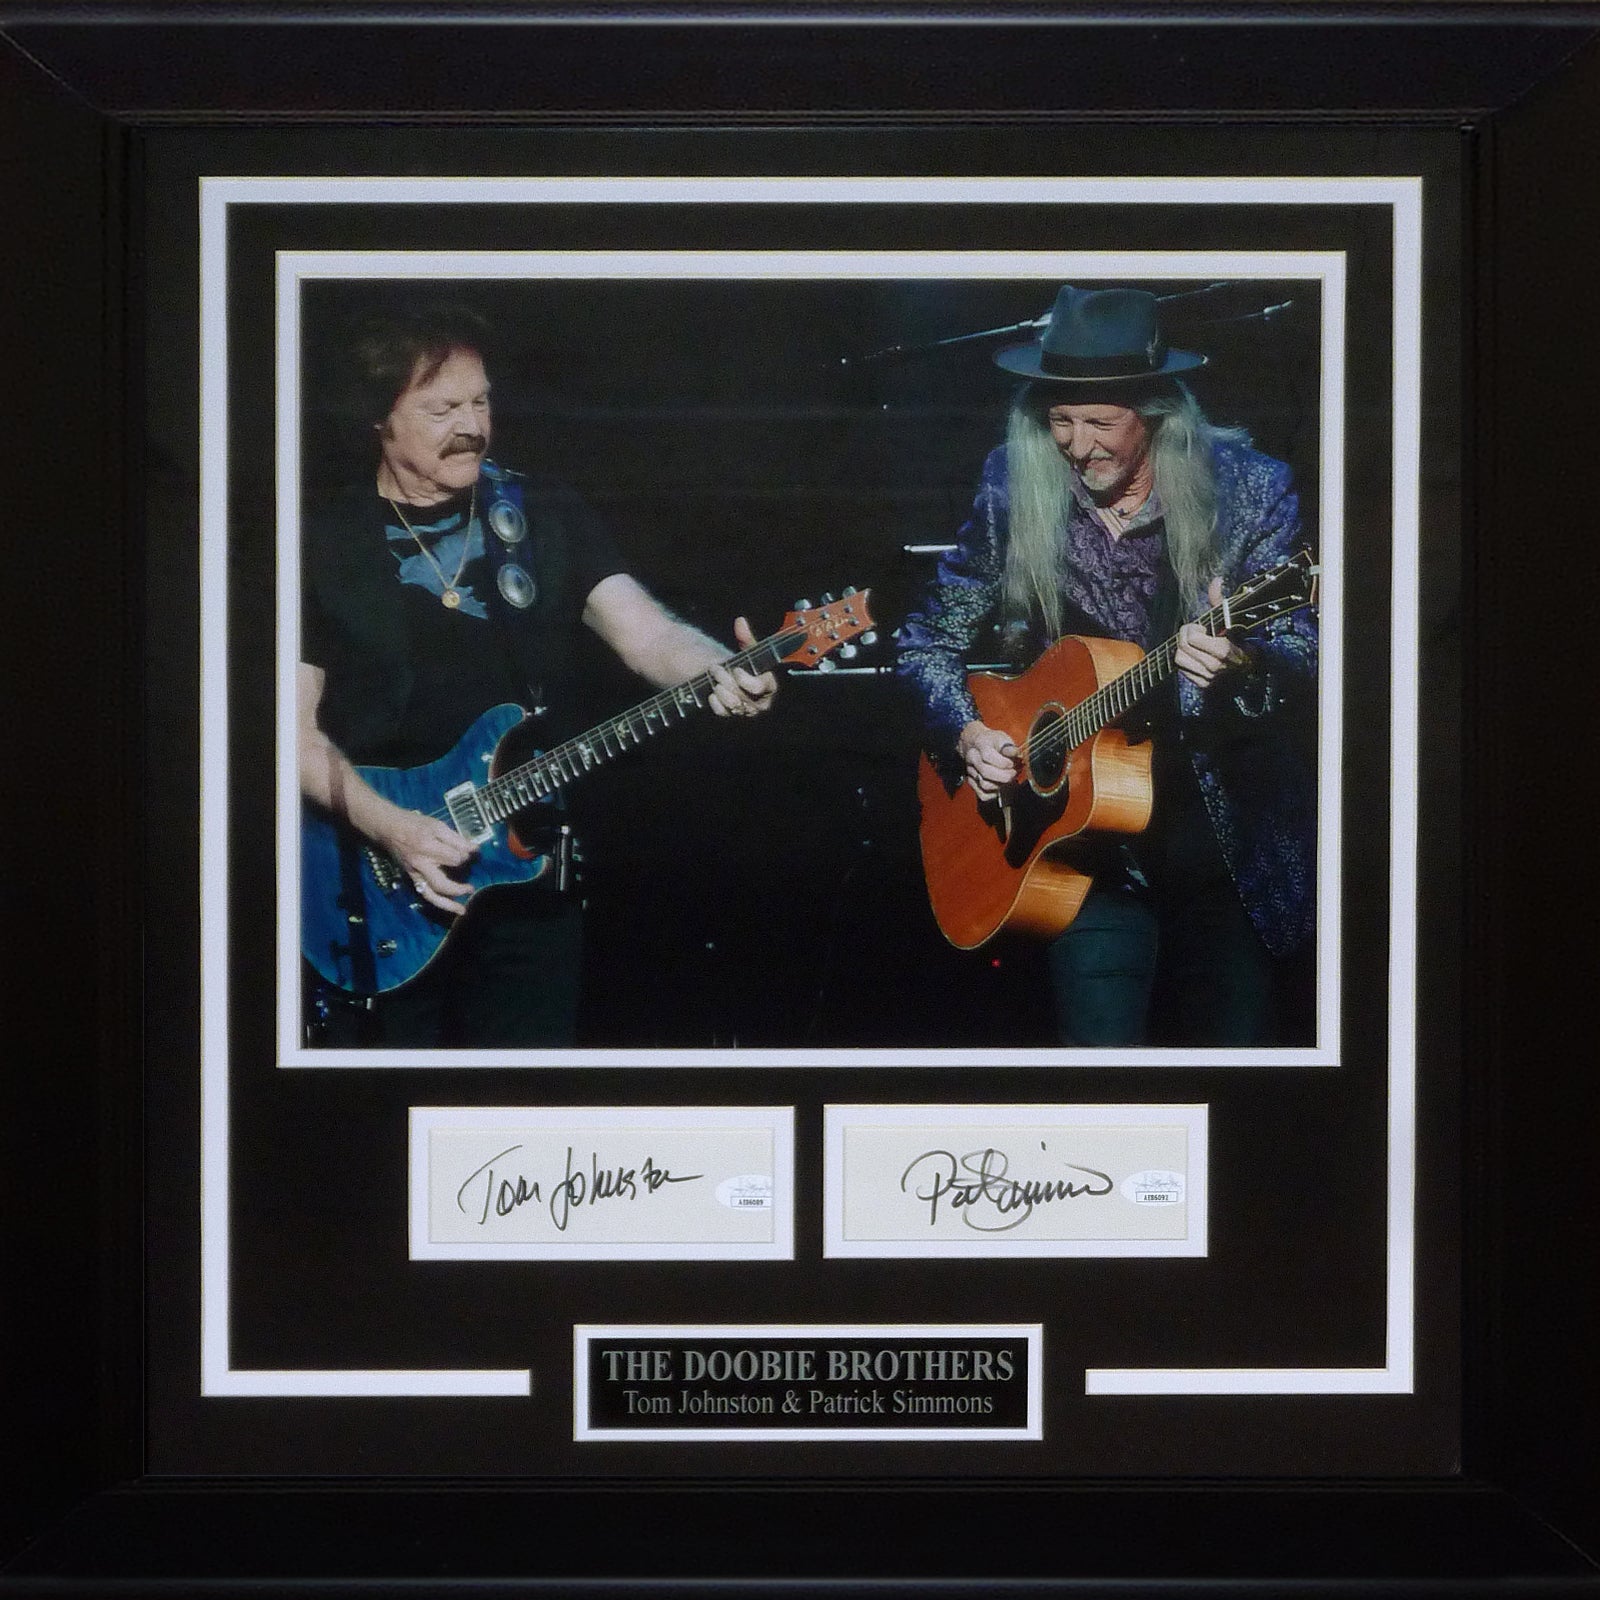 Doobie Brothers Tom Johnston And Patrick Simmons Autographed Deluxe Framed Music 11x14 Photo Frame - JSA